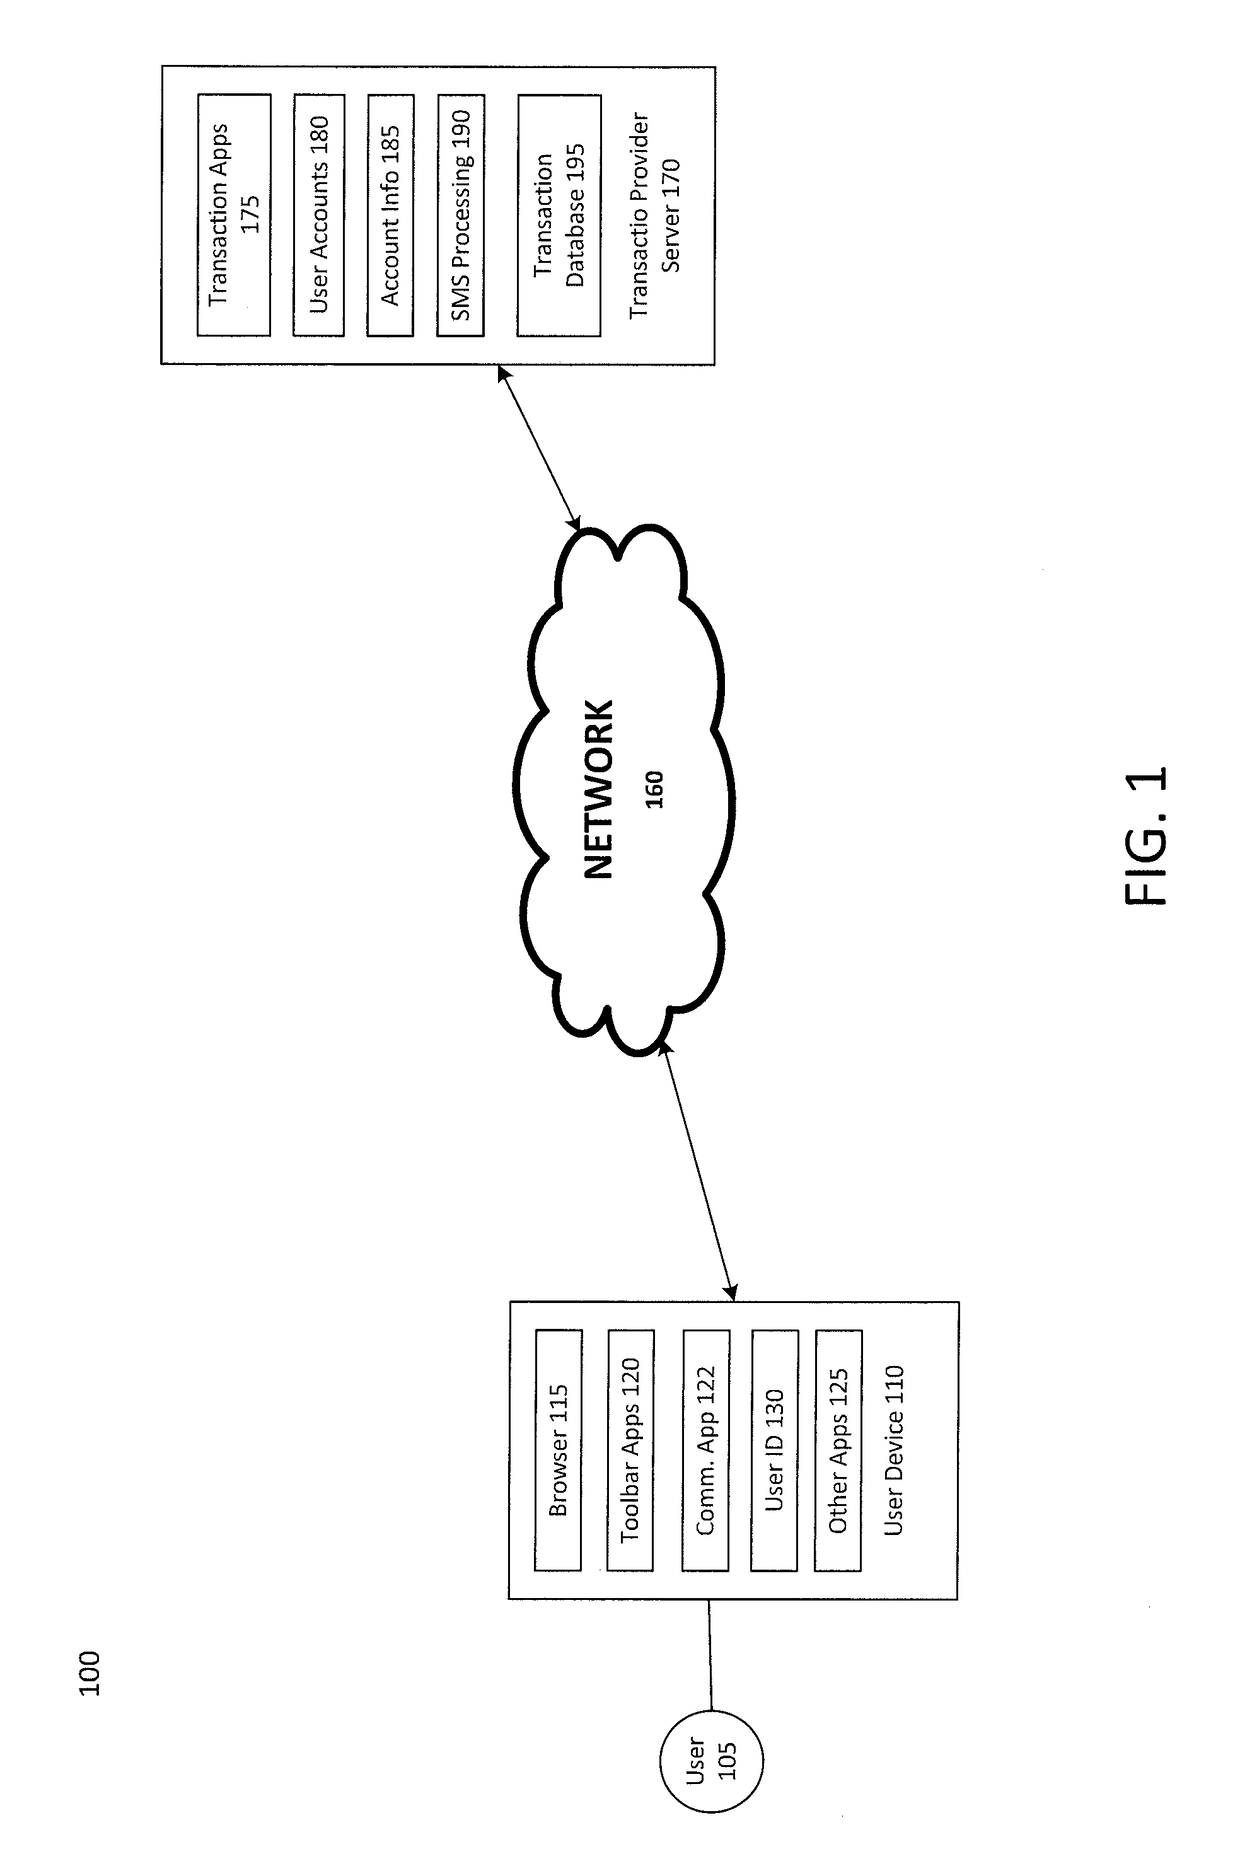 Mobile transaction device implementing transactions via text messaging